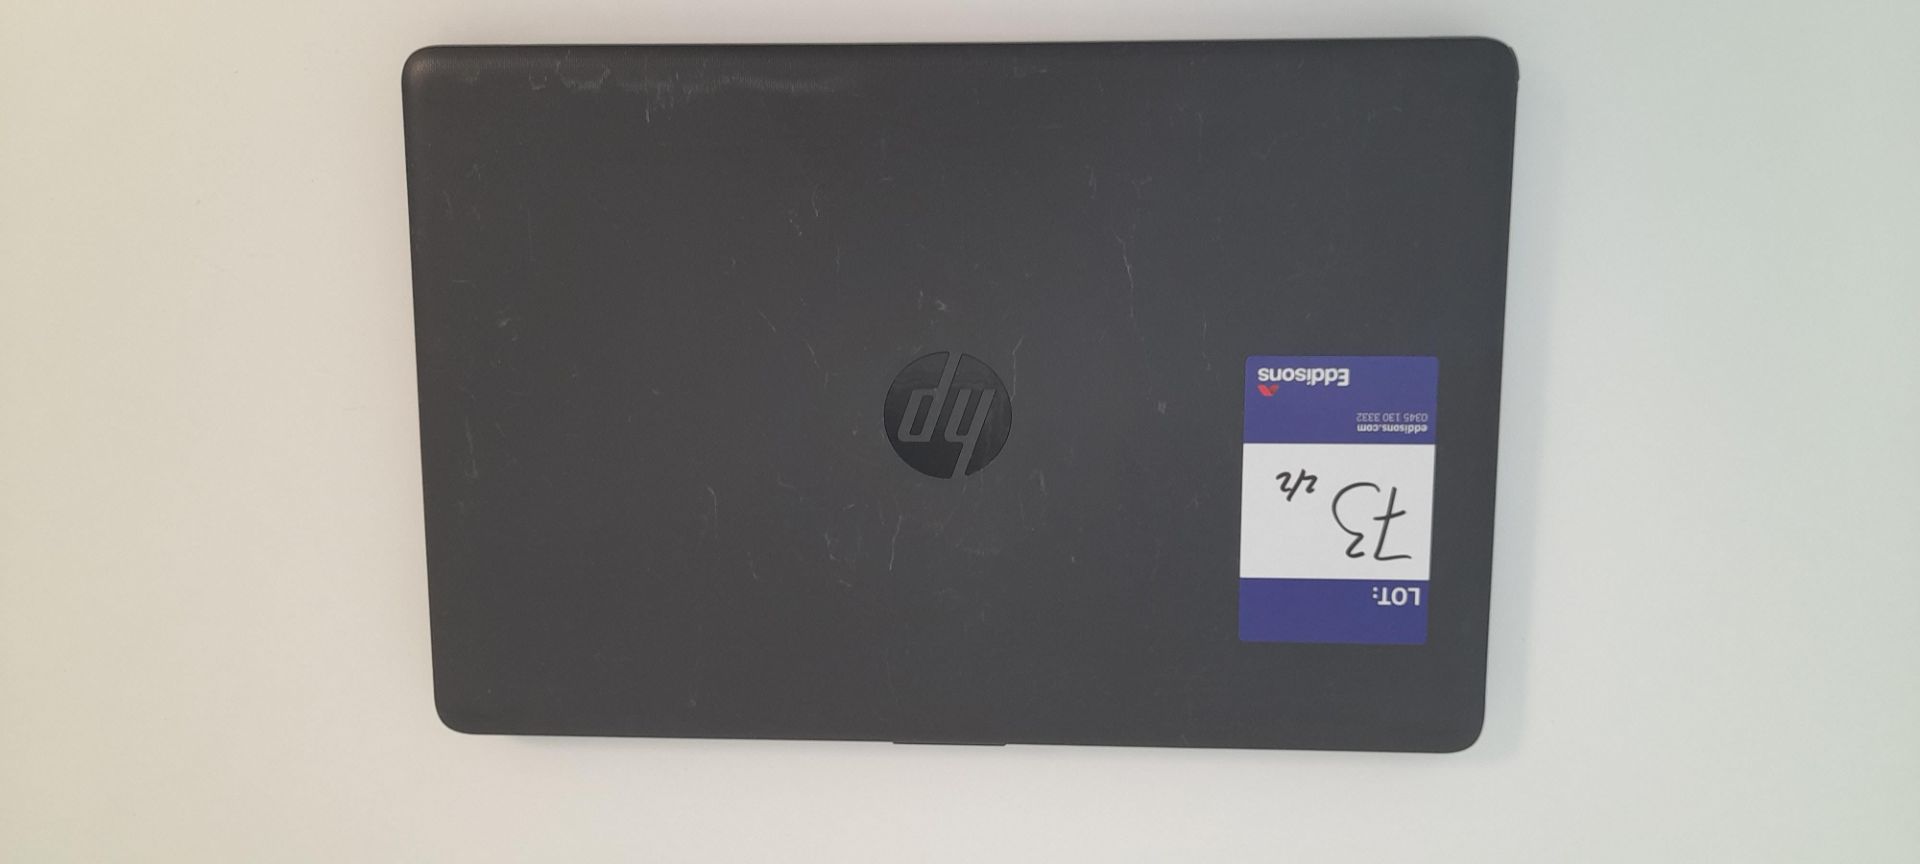 2x HP G250 G7 laptop with intel Core i5, 8th Gen. Collection from Canary Wharf, London, E14 - Image 9 of 15